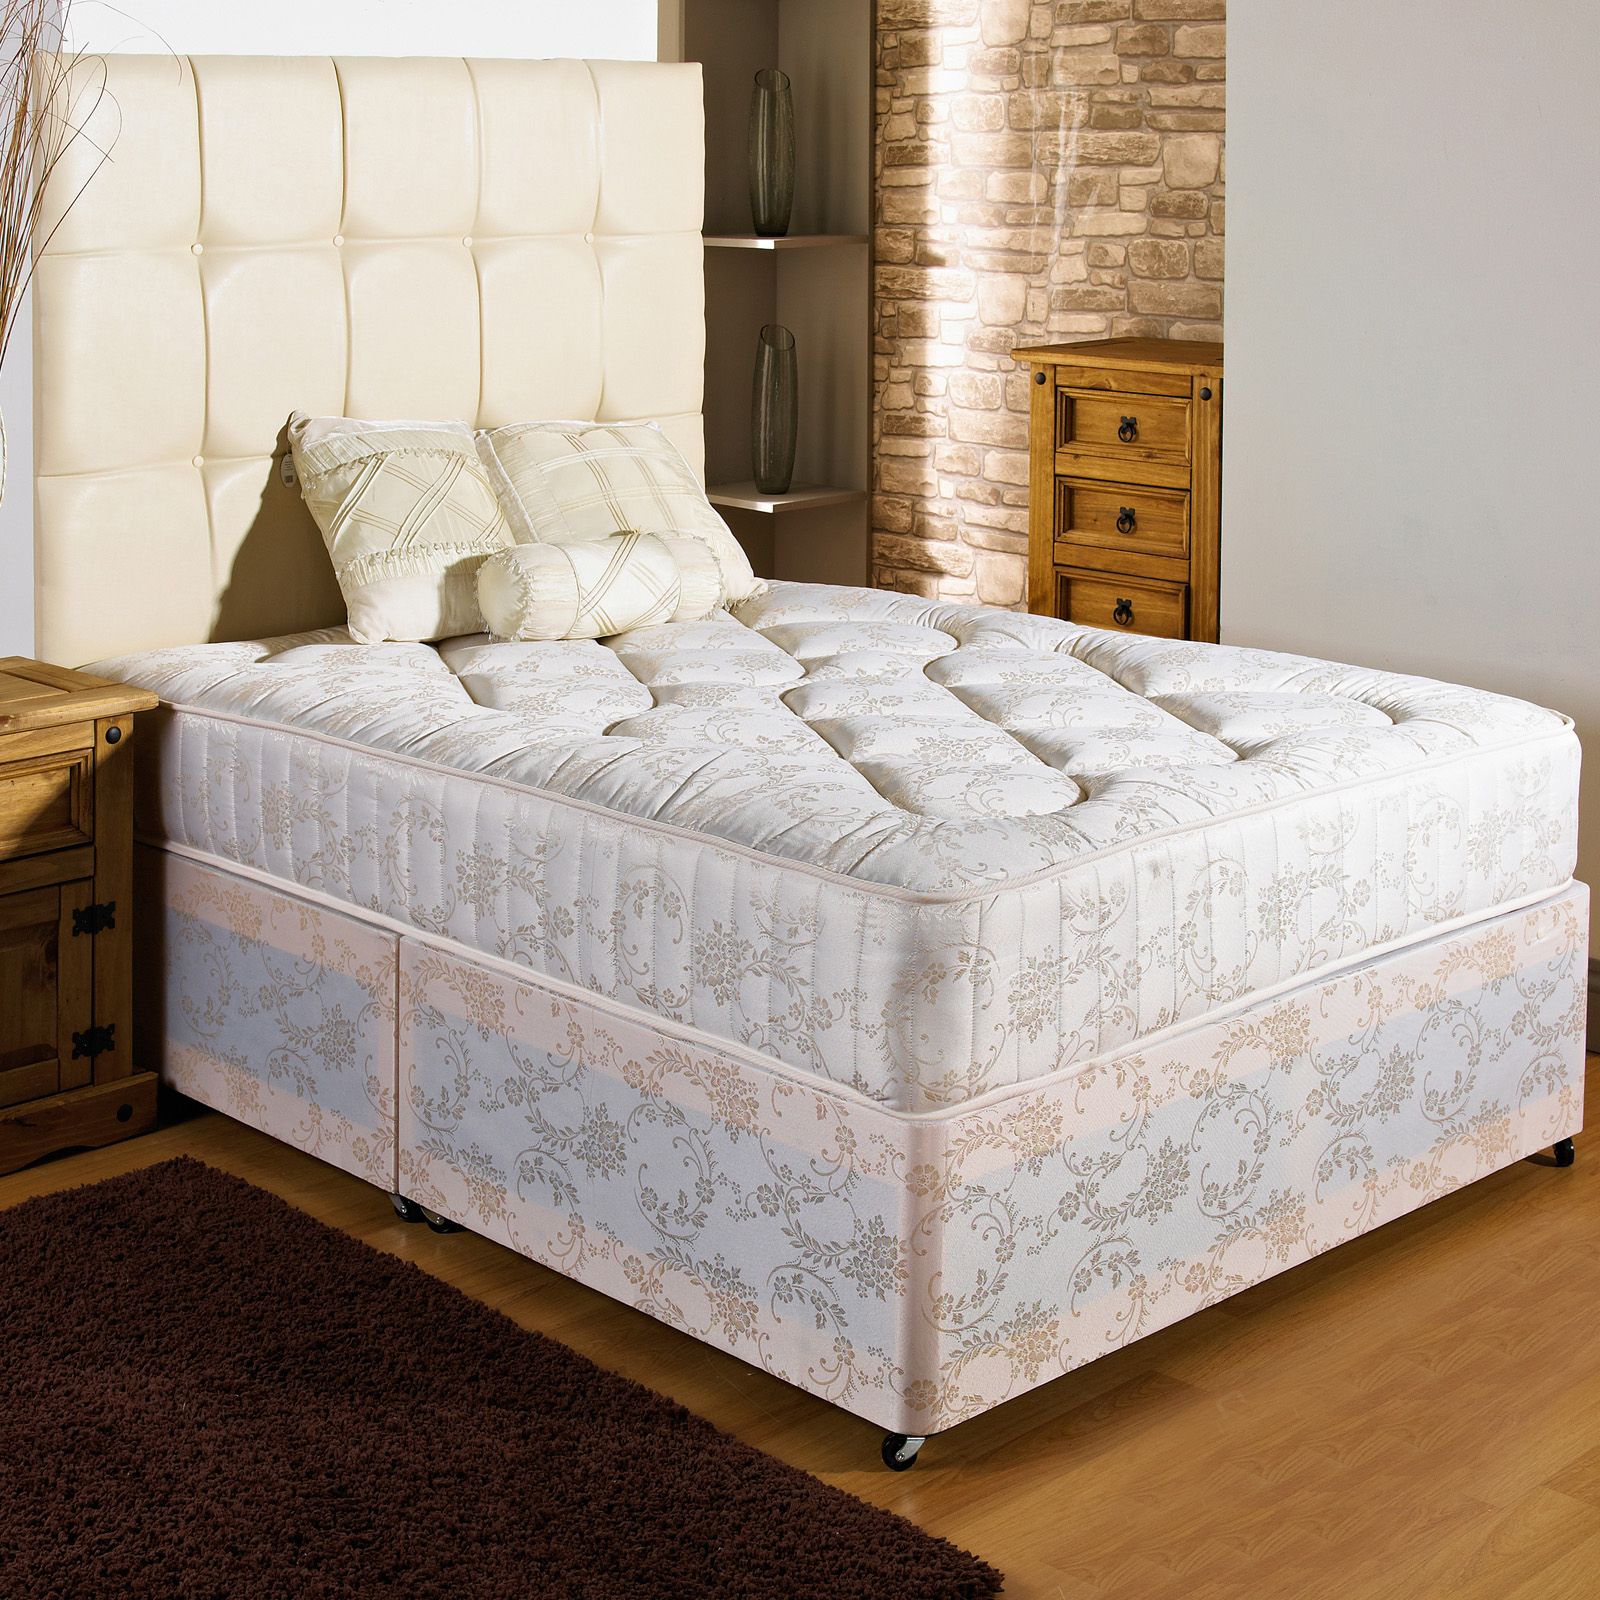 No Storage Hf4you 2Ft 6 Small Single Firm Ortho Damask Divan Bed 12.5G Spring Open Coil Mattress 